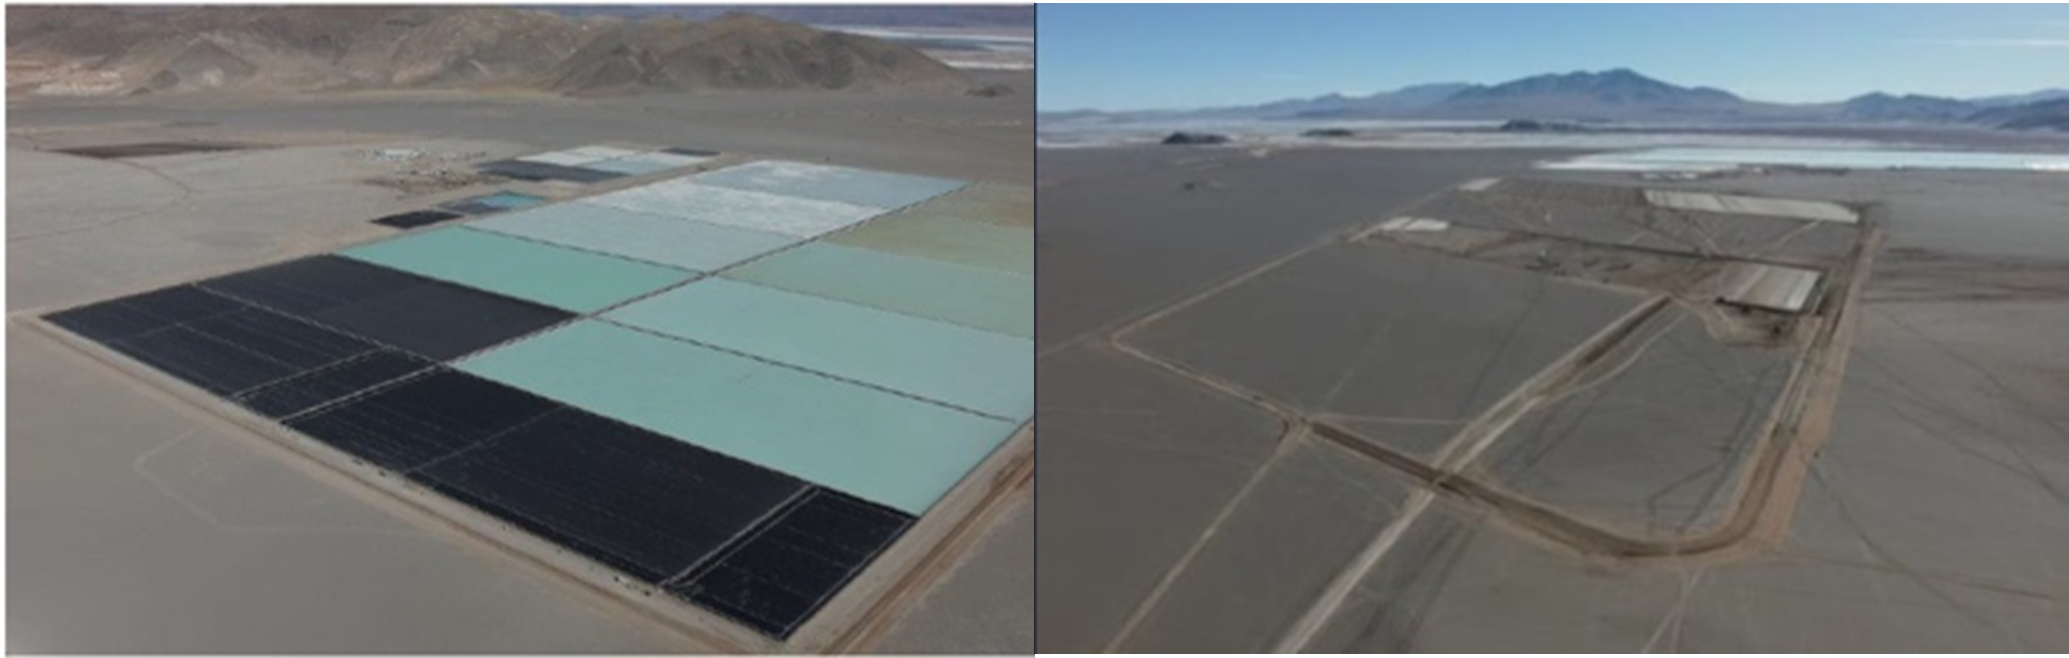 First 2 strings of evaporation ponds (left), third string (right)